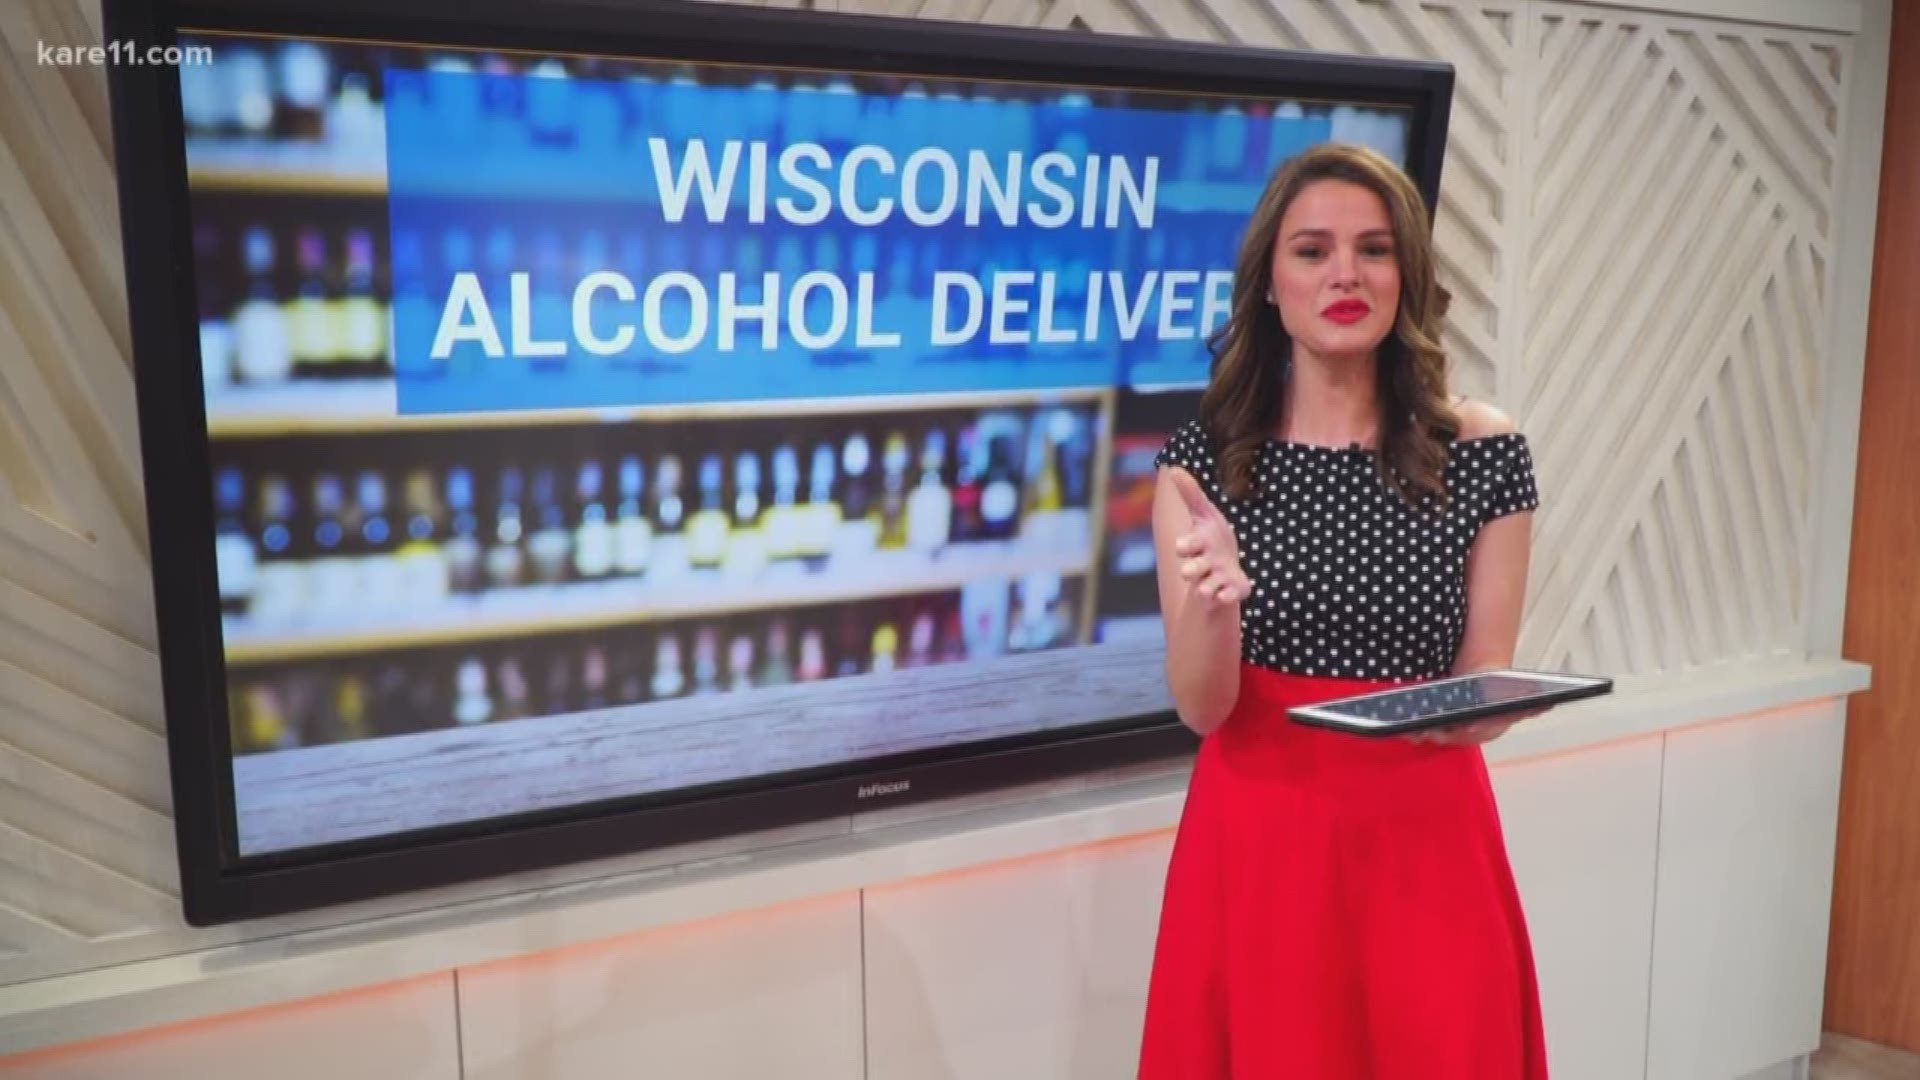 Getting alcohol delivered to your home is legal in Minnesota. Now, Wisconsin is jumping on the bandwagon and introducing a bill of their own to legalize alcohol delivery. https://kare11.tv/2HPGRN7